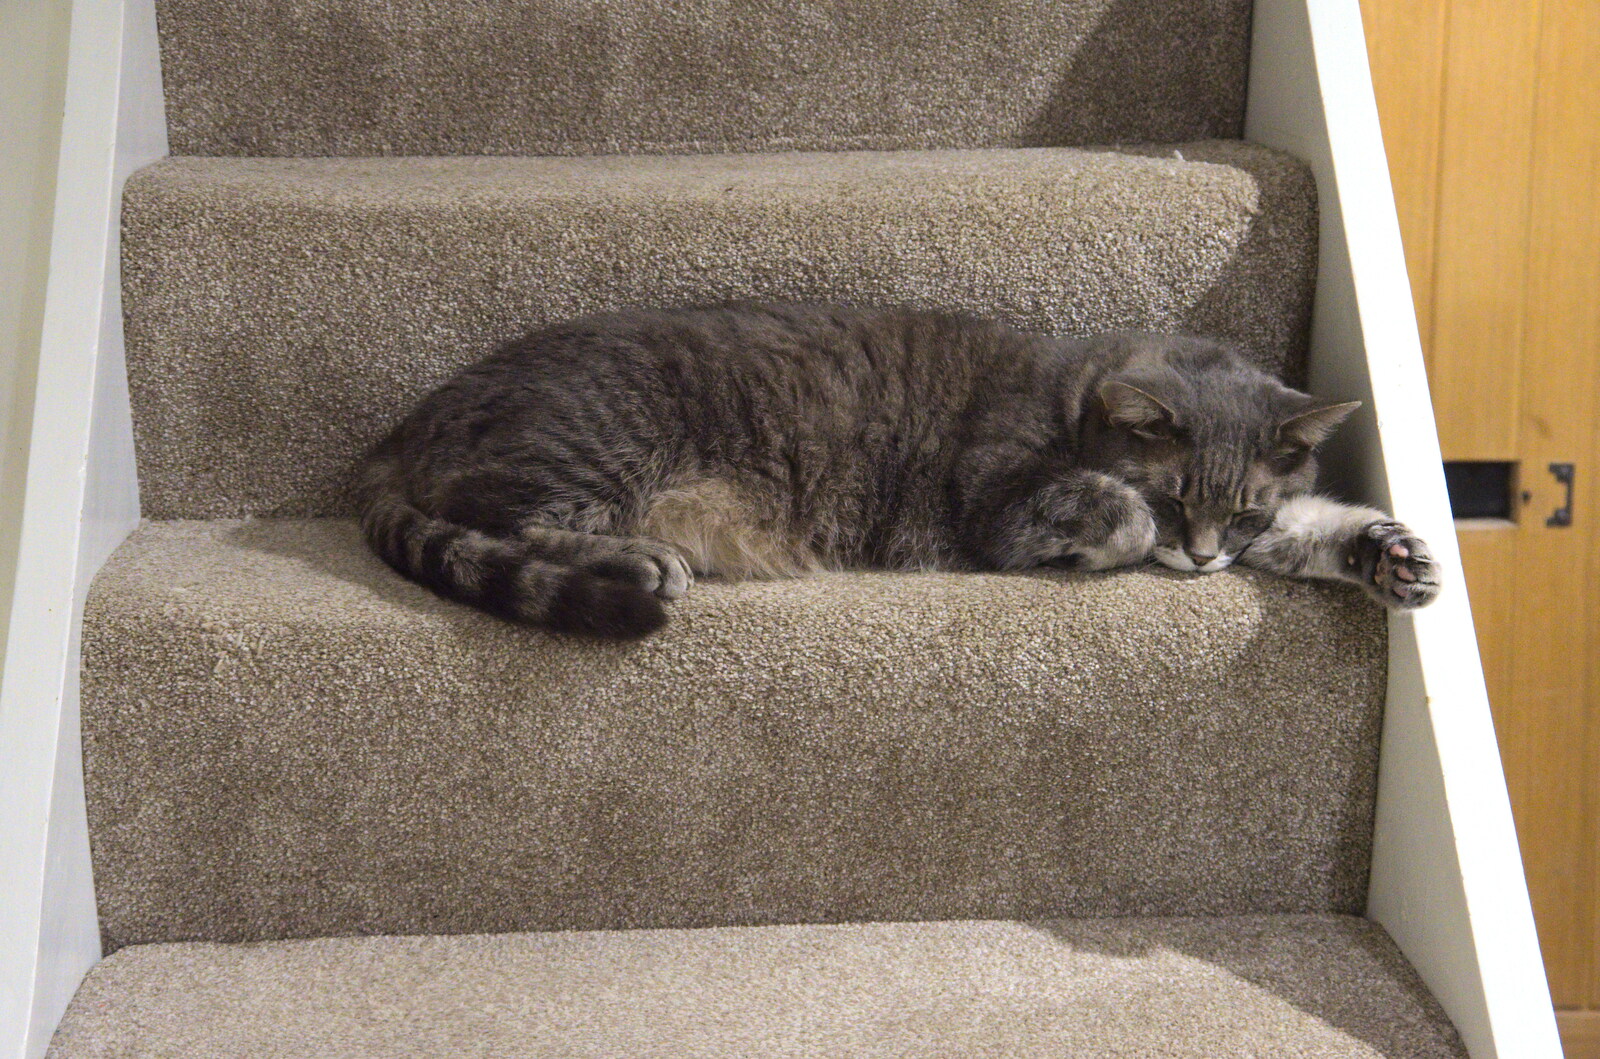 Back home, Boris - Stripey Cat - is on the stairs from Isobel's Birthday, Woodbridge, Suffolk - 2nd November 2020